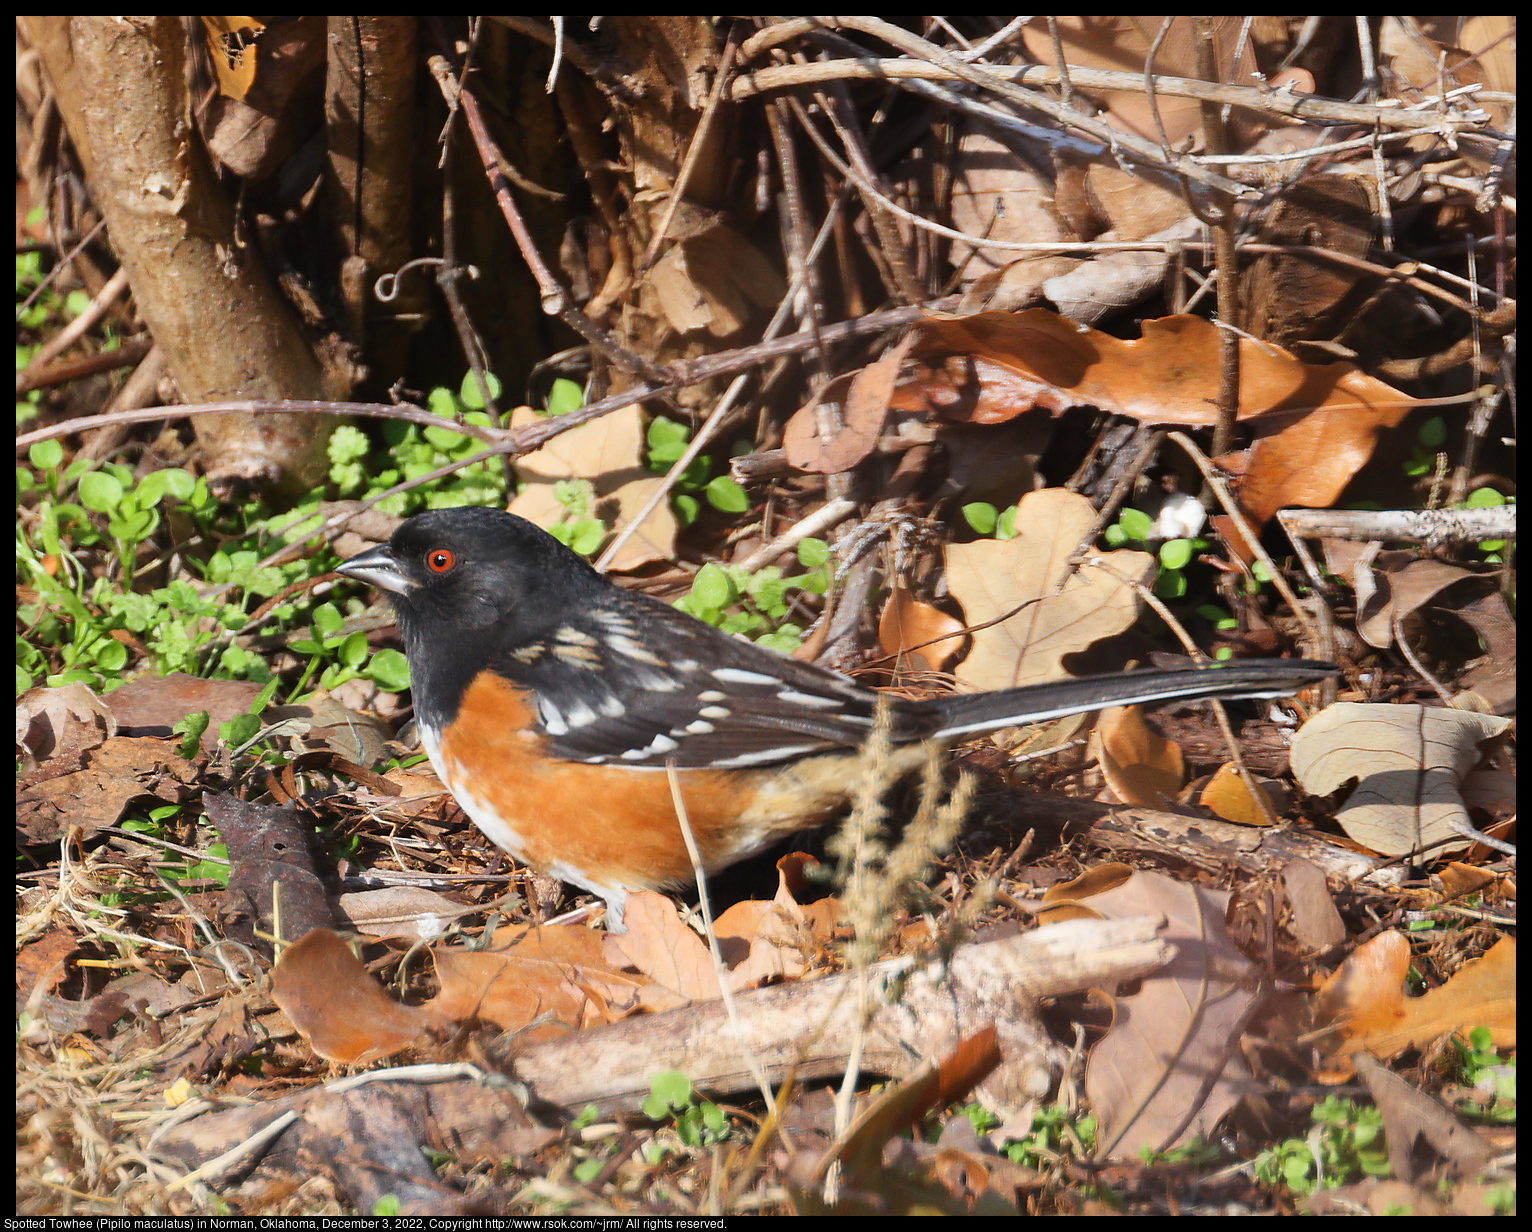 Spotted Towhee (Pipilo maculatus) in Norman, Oklahoma, December 3, 2022